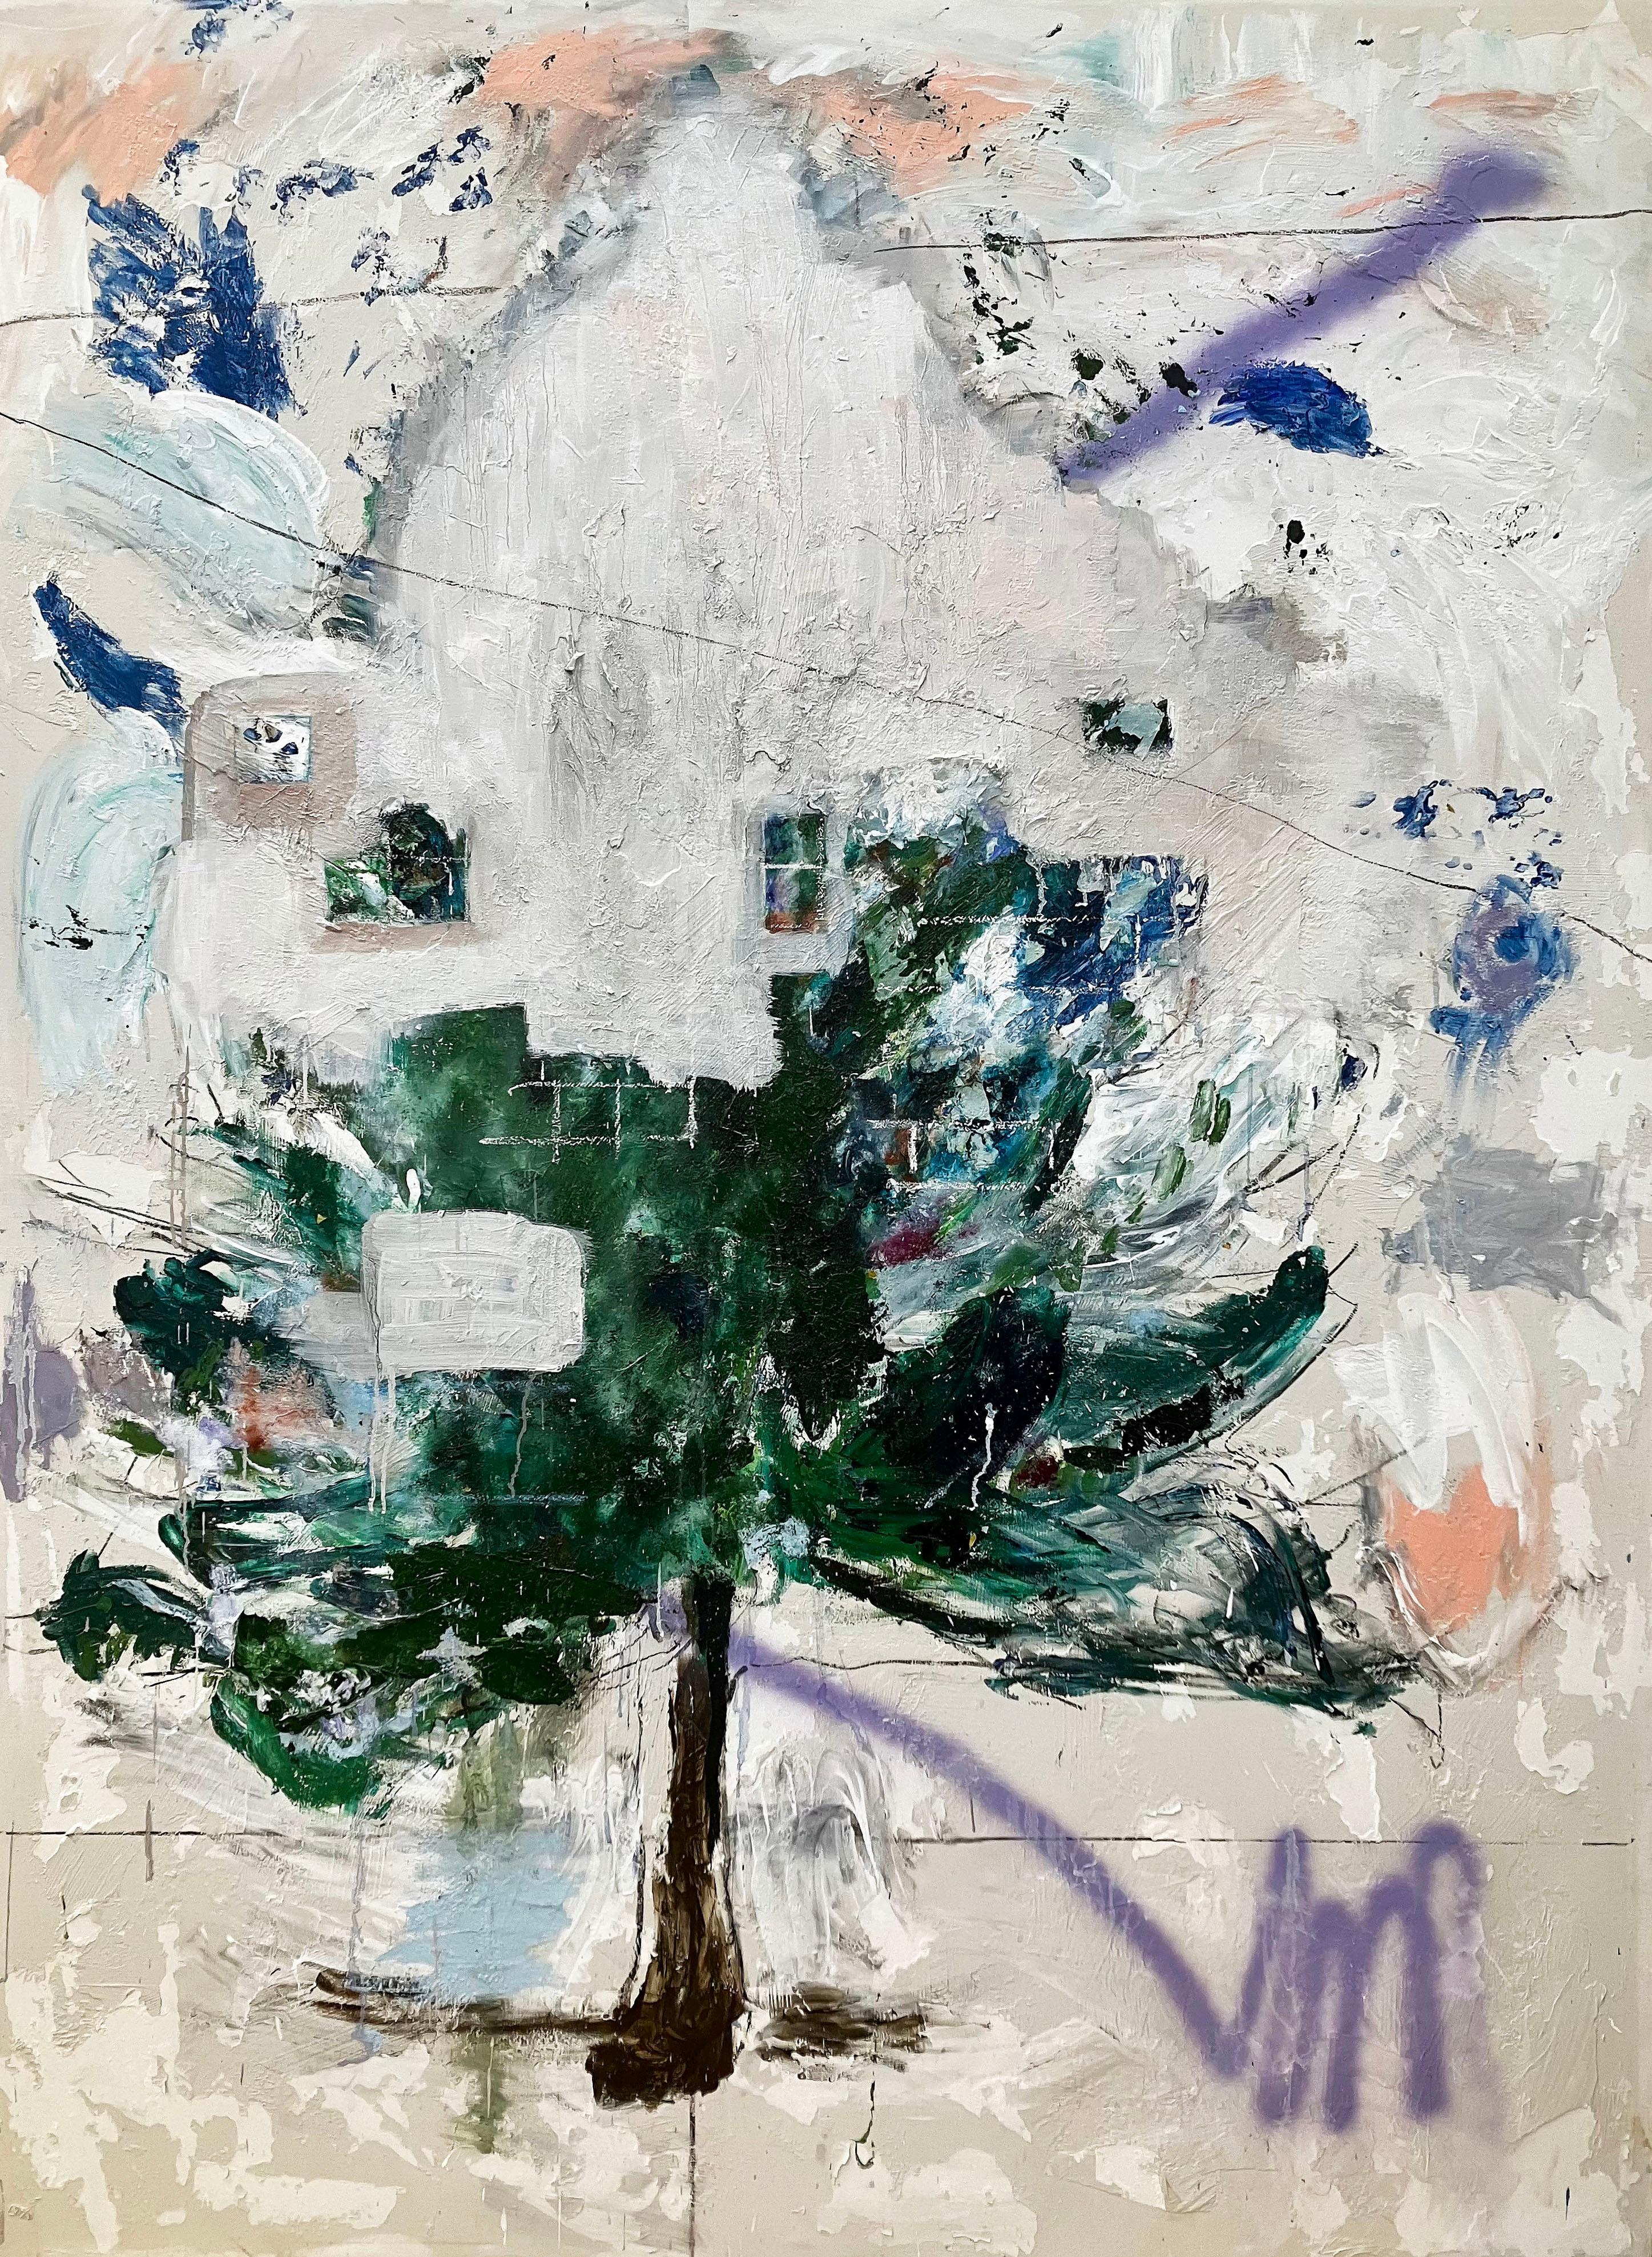 C. Dimitri Abstract Painting - Parade Street Shroud, white abstraction w green tree graffiti elements windows